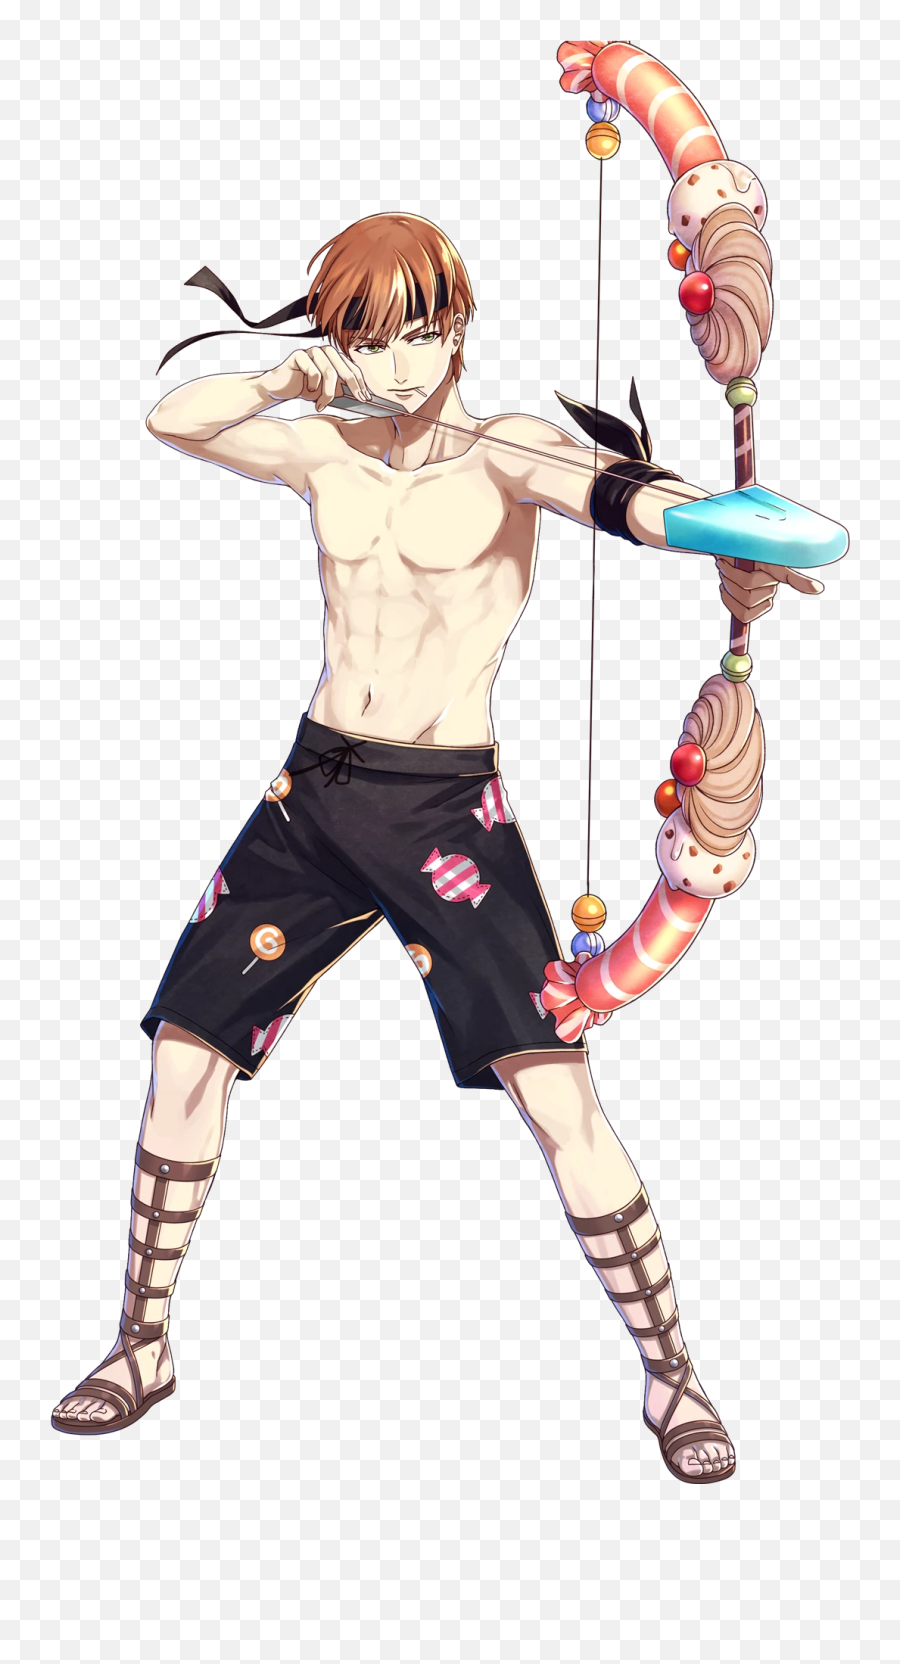 Datamined Banner Leaked Girls And Guys - Page 2 Fire Gaius Swimsuit Fire Emblem Emoji,Archery Emoji